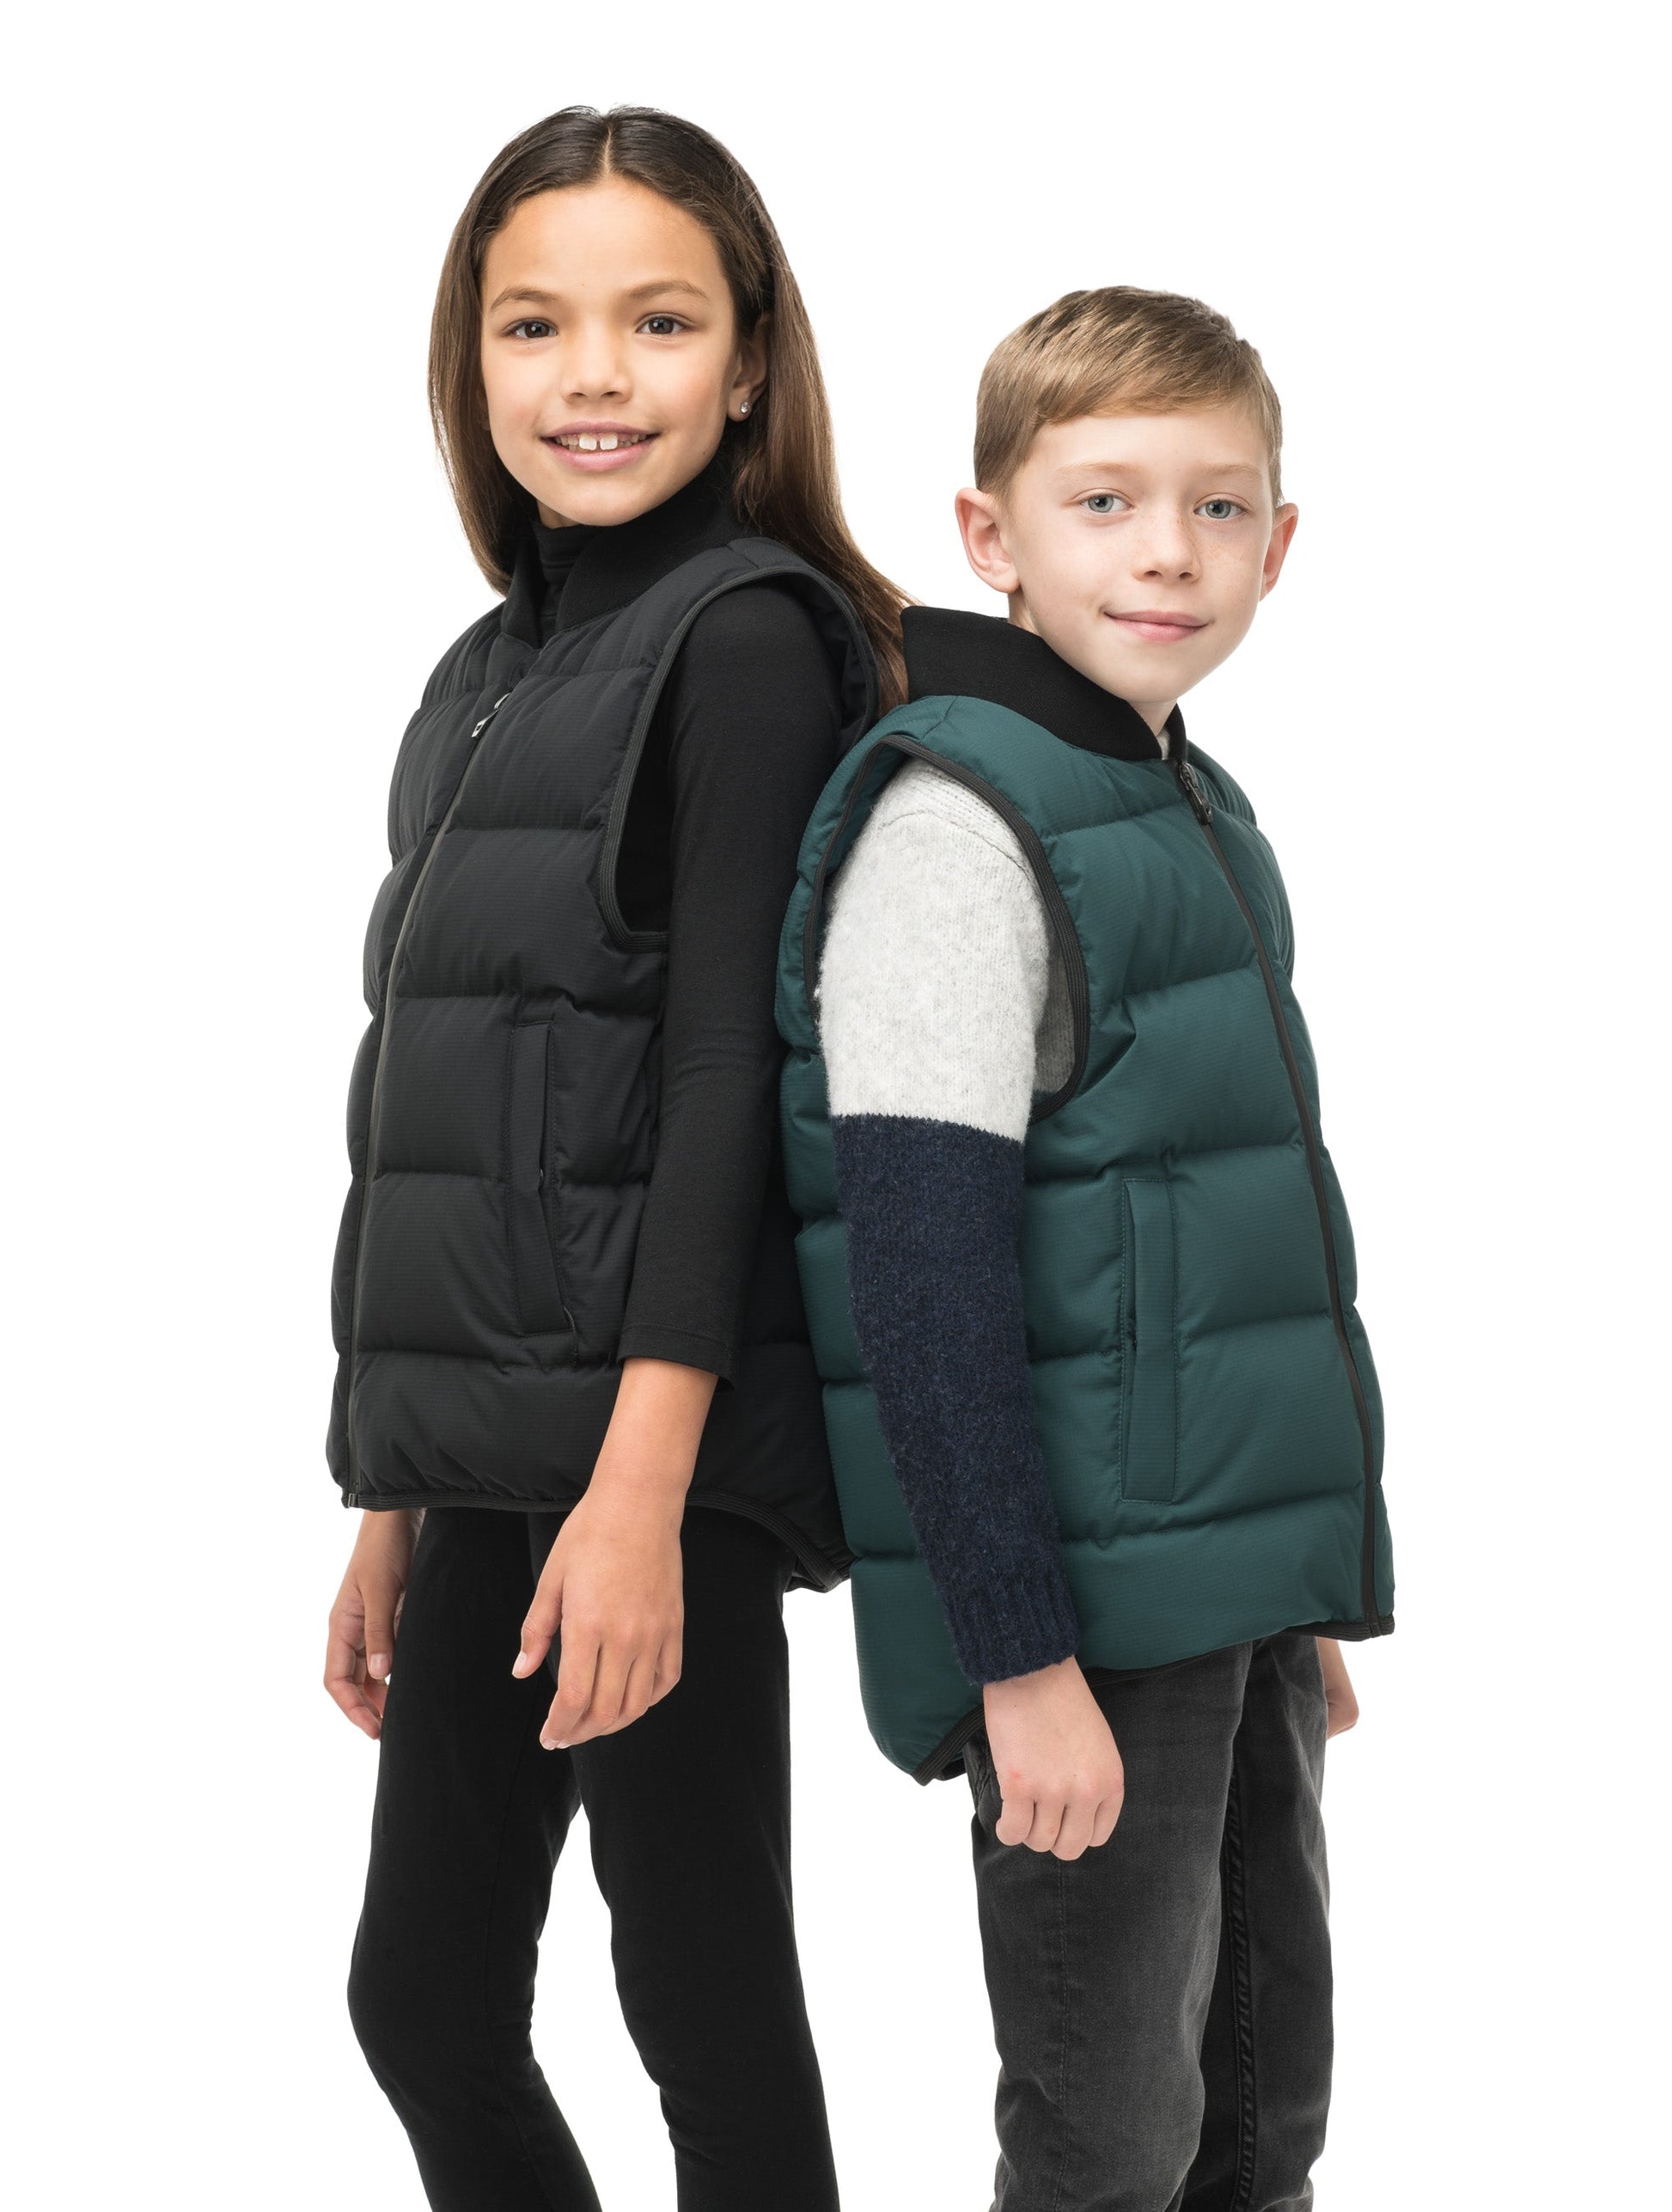 Little Pluto Kids Mid Layer Vest in hip length, Canadian duck down insulation, ribbed collar, two-way front zipper, and quilted body, in Black